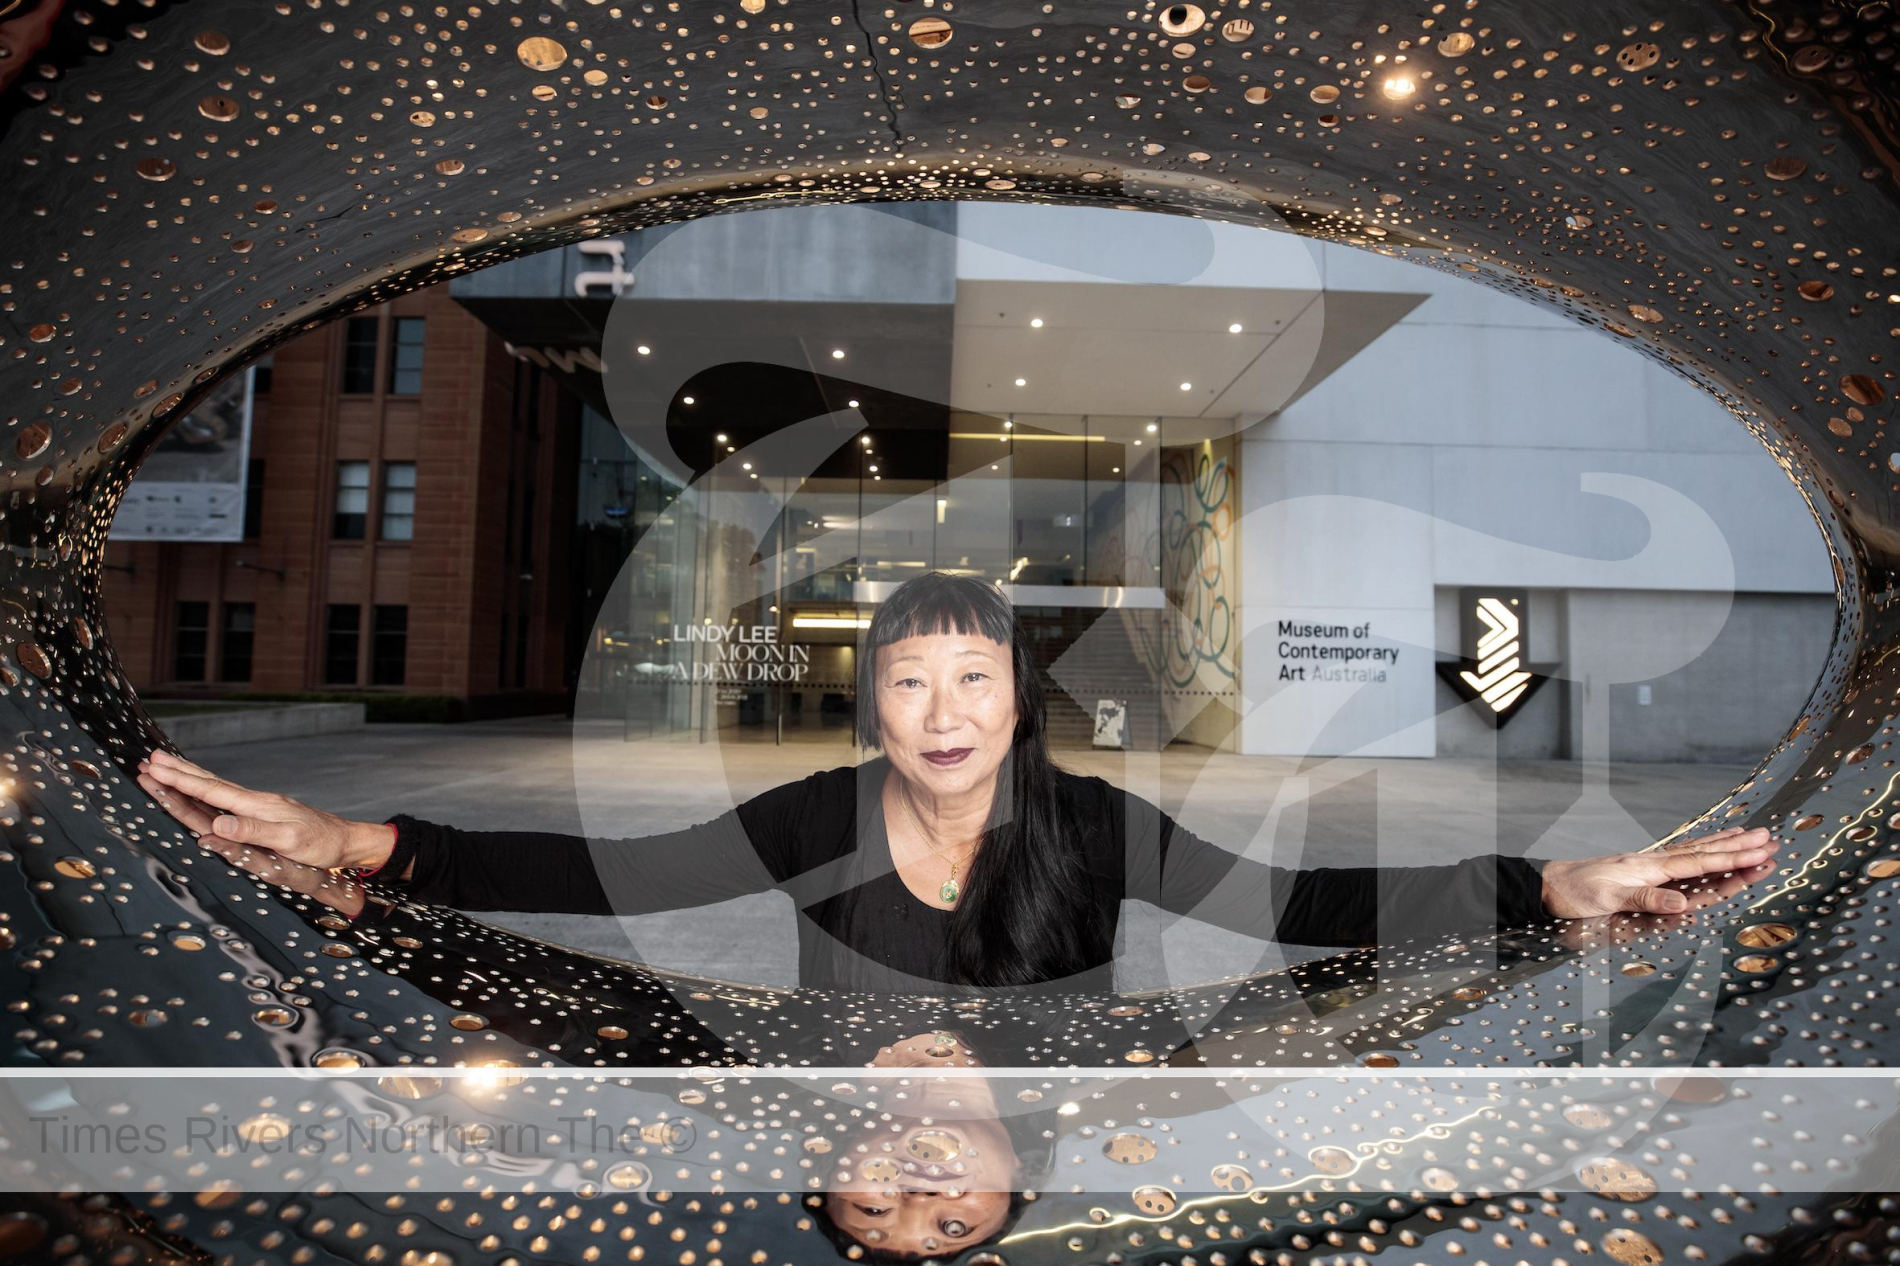 MCA presents national exhibition tour of Australian Chinese Artist Lindy Lee at Lismore Regional Gallery.